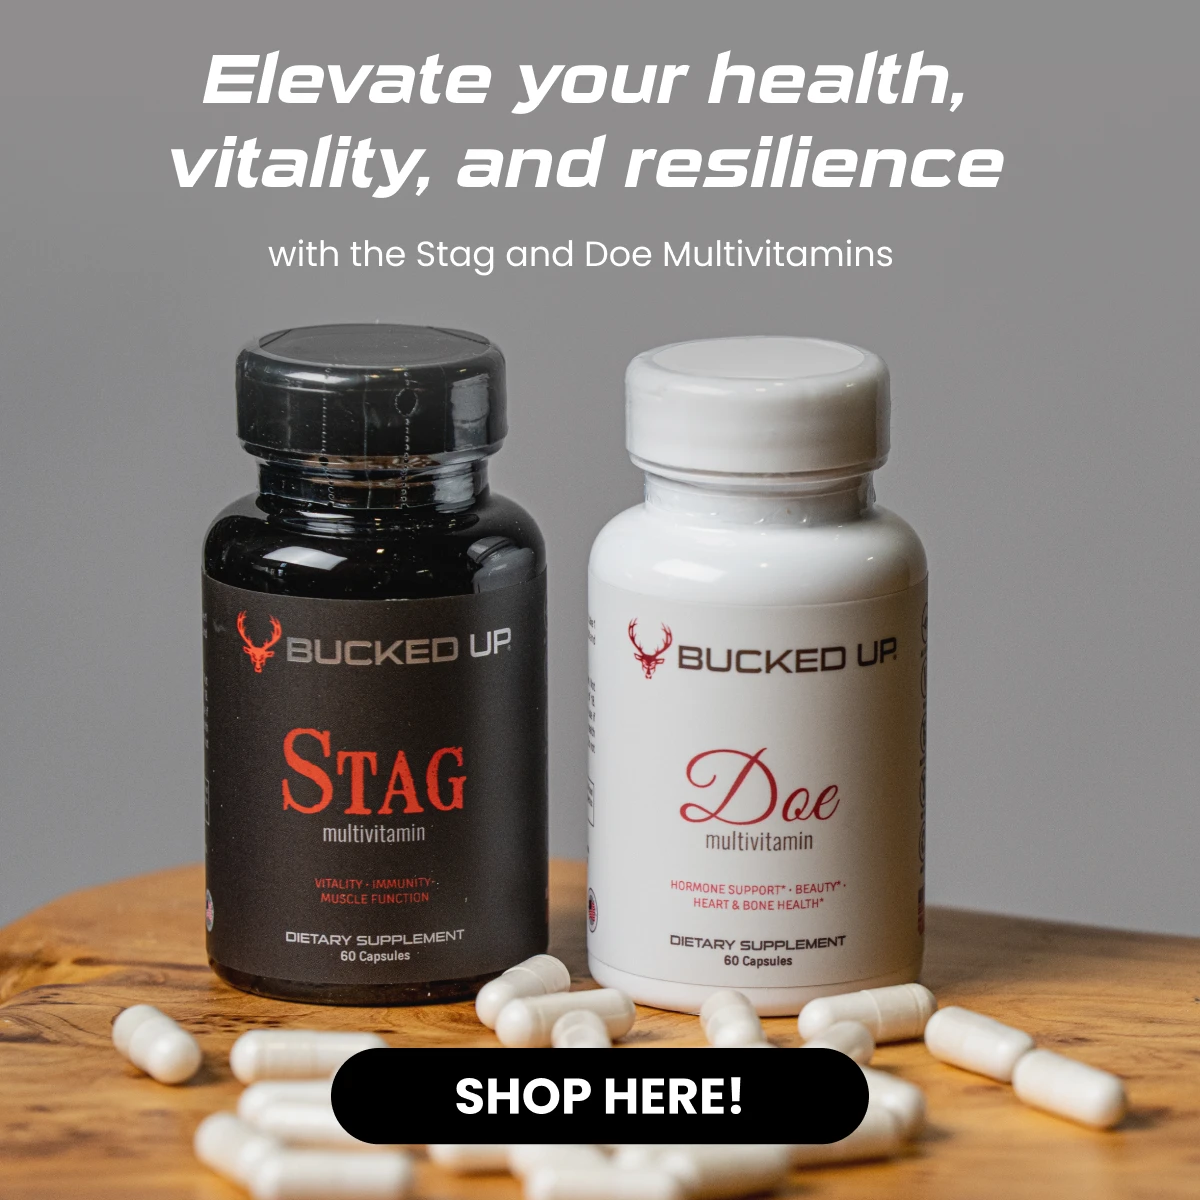 Bucked Up Multivitamins (STAG and DOE) - Image of bottles of Bucked Up Stag and Doe, our multivitamin products, on a small table with multivitamin capsules spilled out in front of them.  Text reads "Elevate your health, vitality, and resilience with